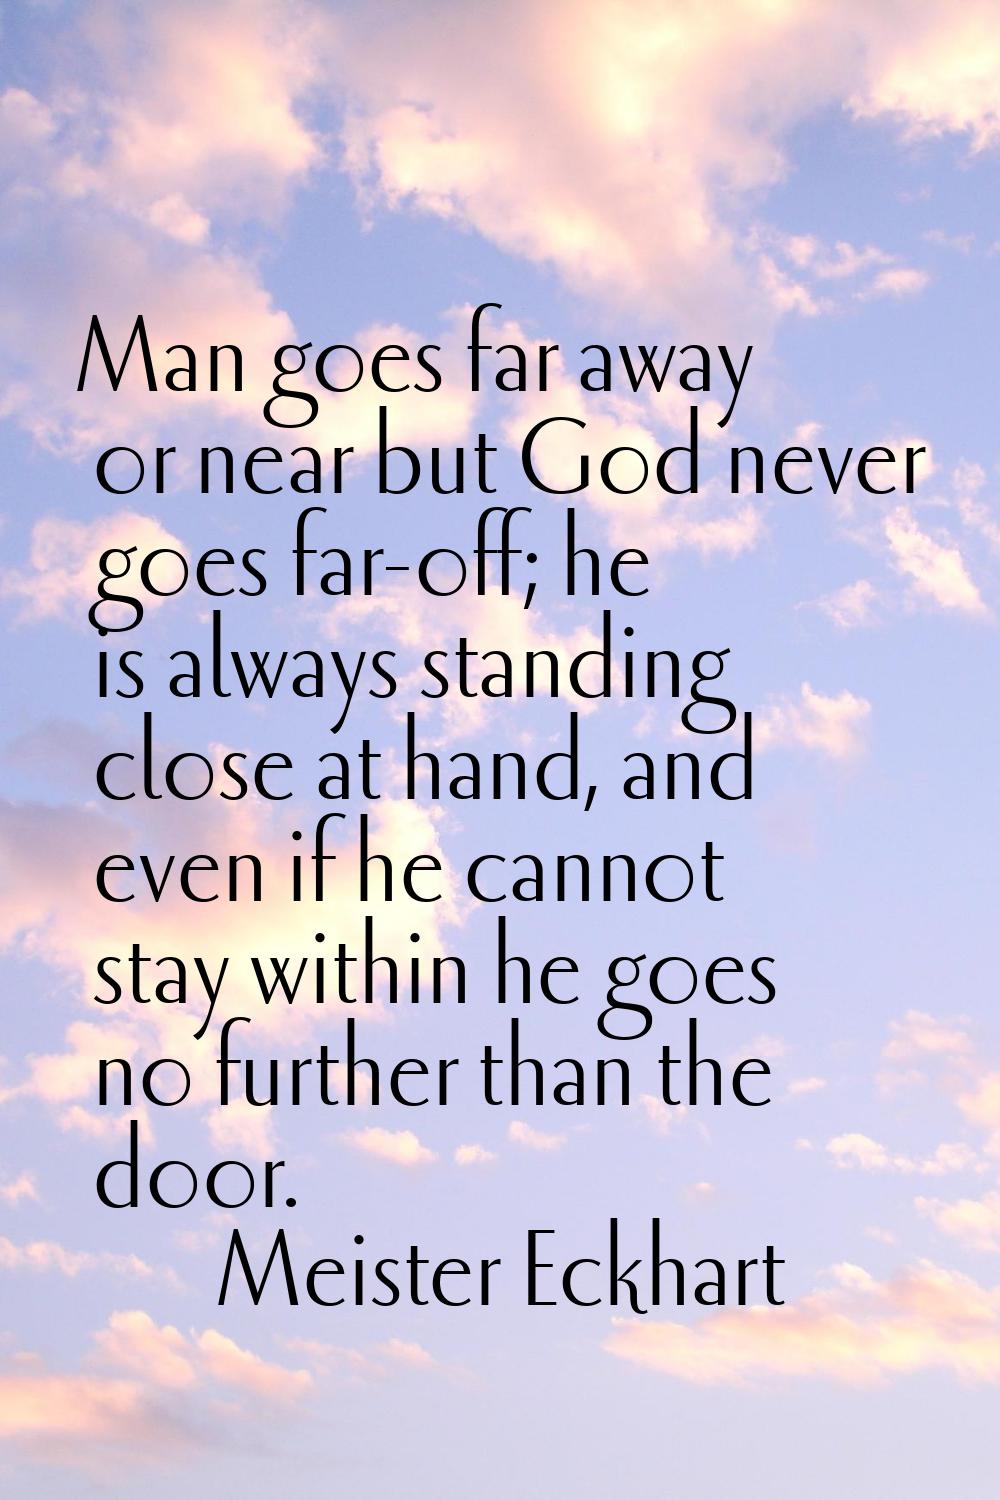 Man goes far away or near but God never goes far-off; he is always standing close at hand, and even